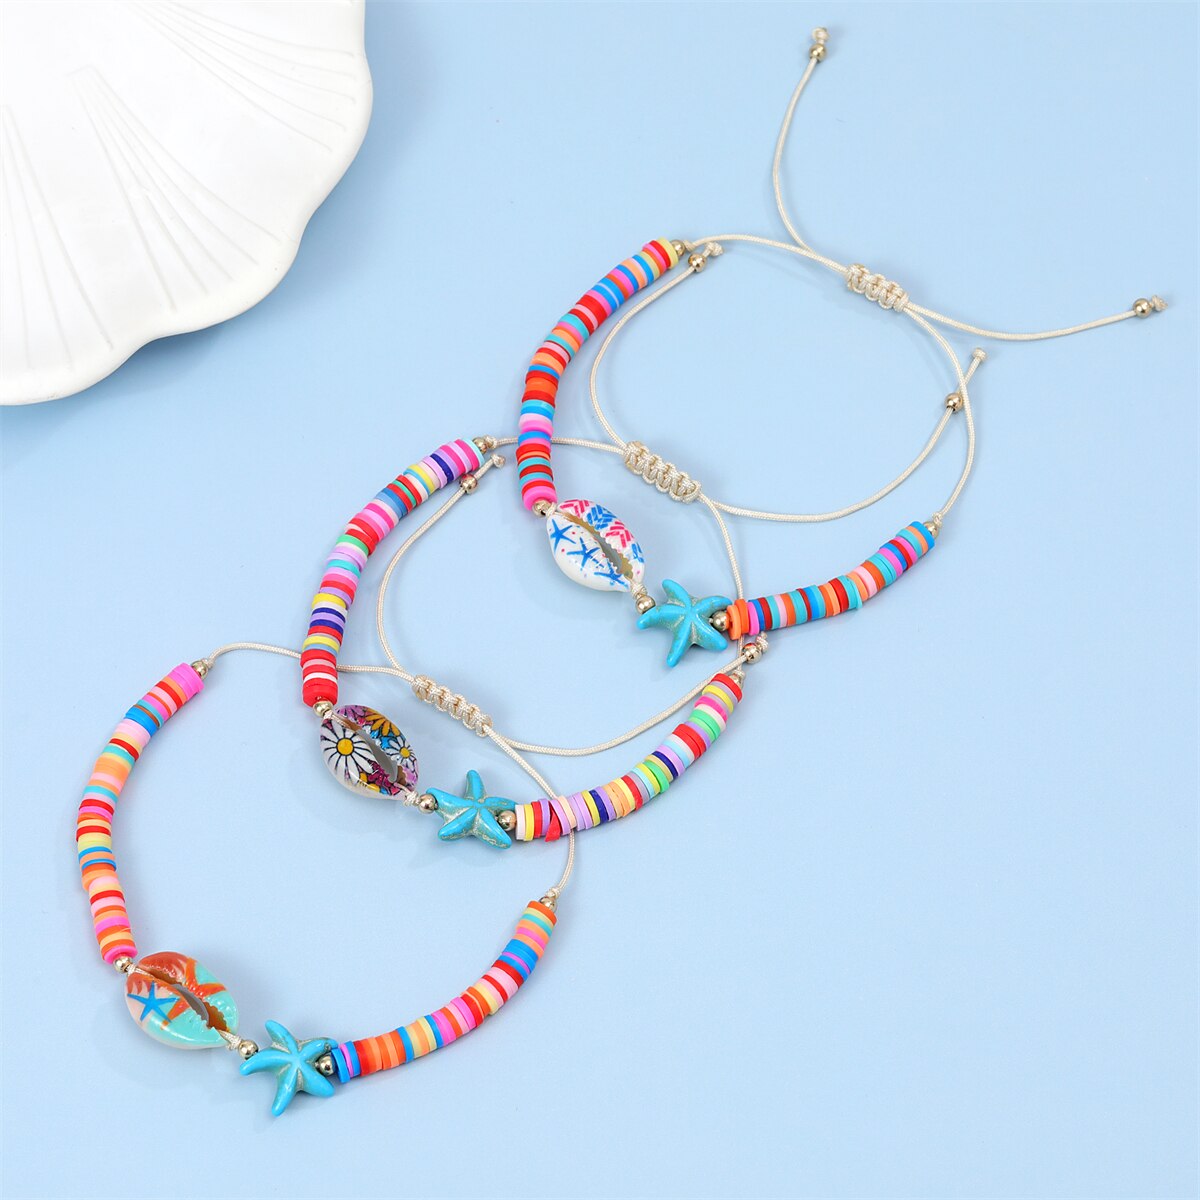 12 Pcs Beach Shell Starfish Pendant Bracelet Anklet for Women Summer Handmade Ankle Adjustable Clay Stackable Wholesale